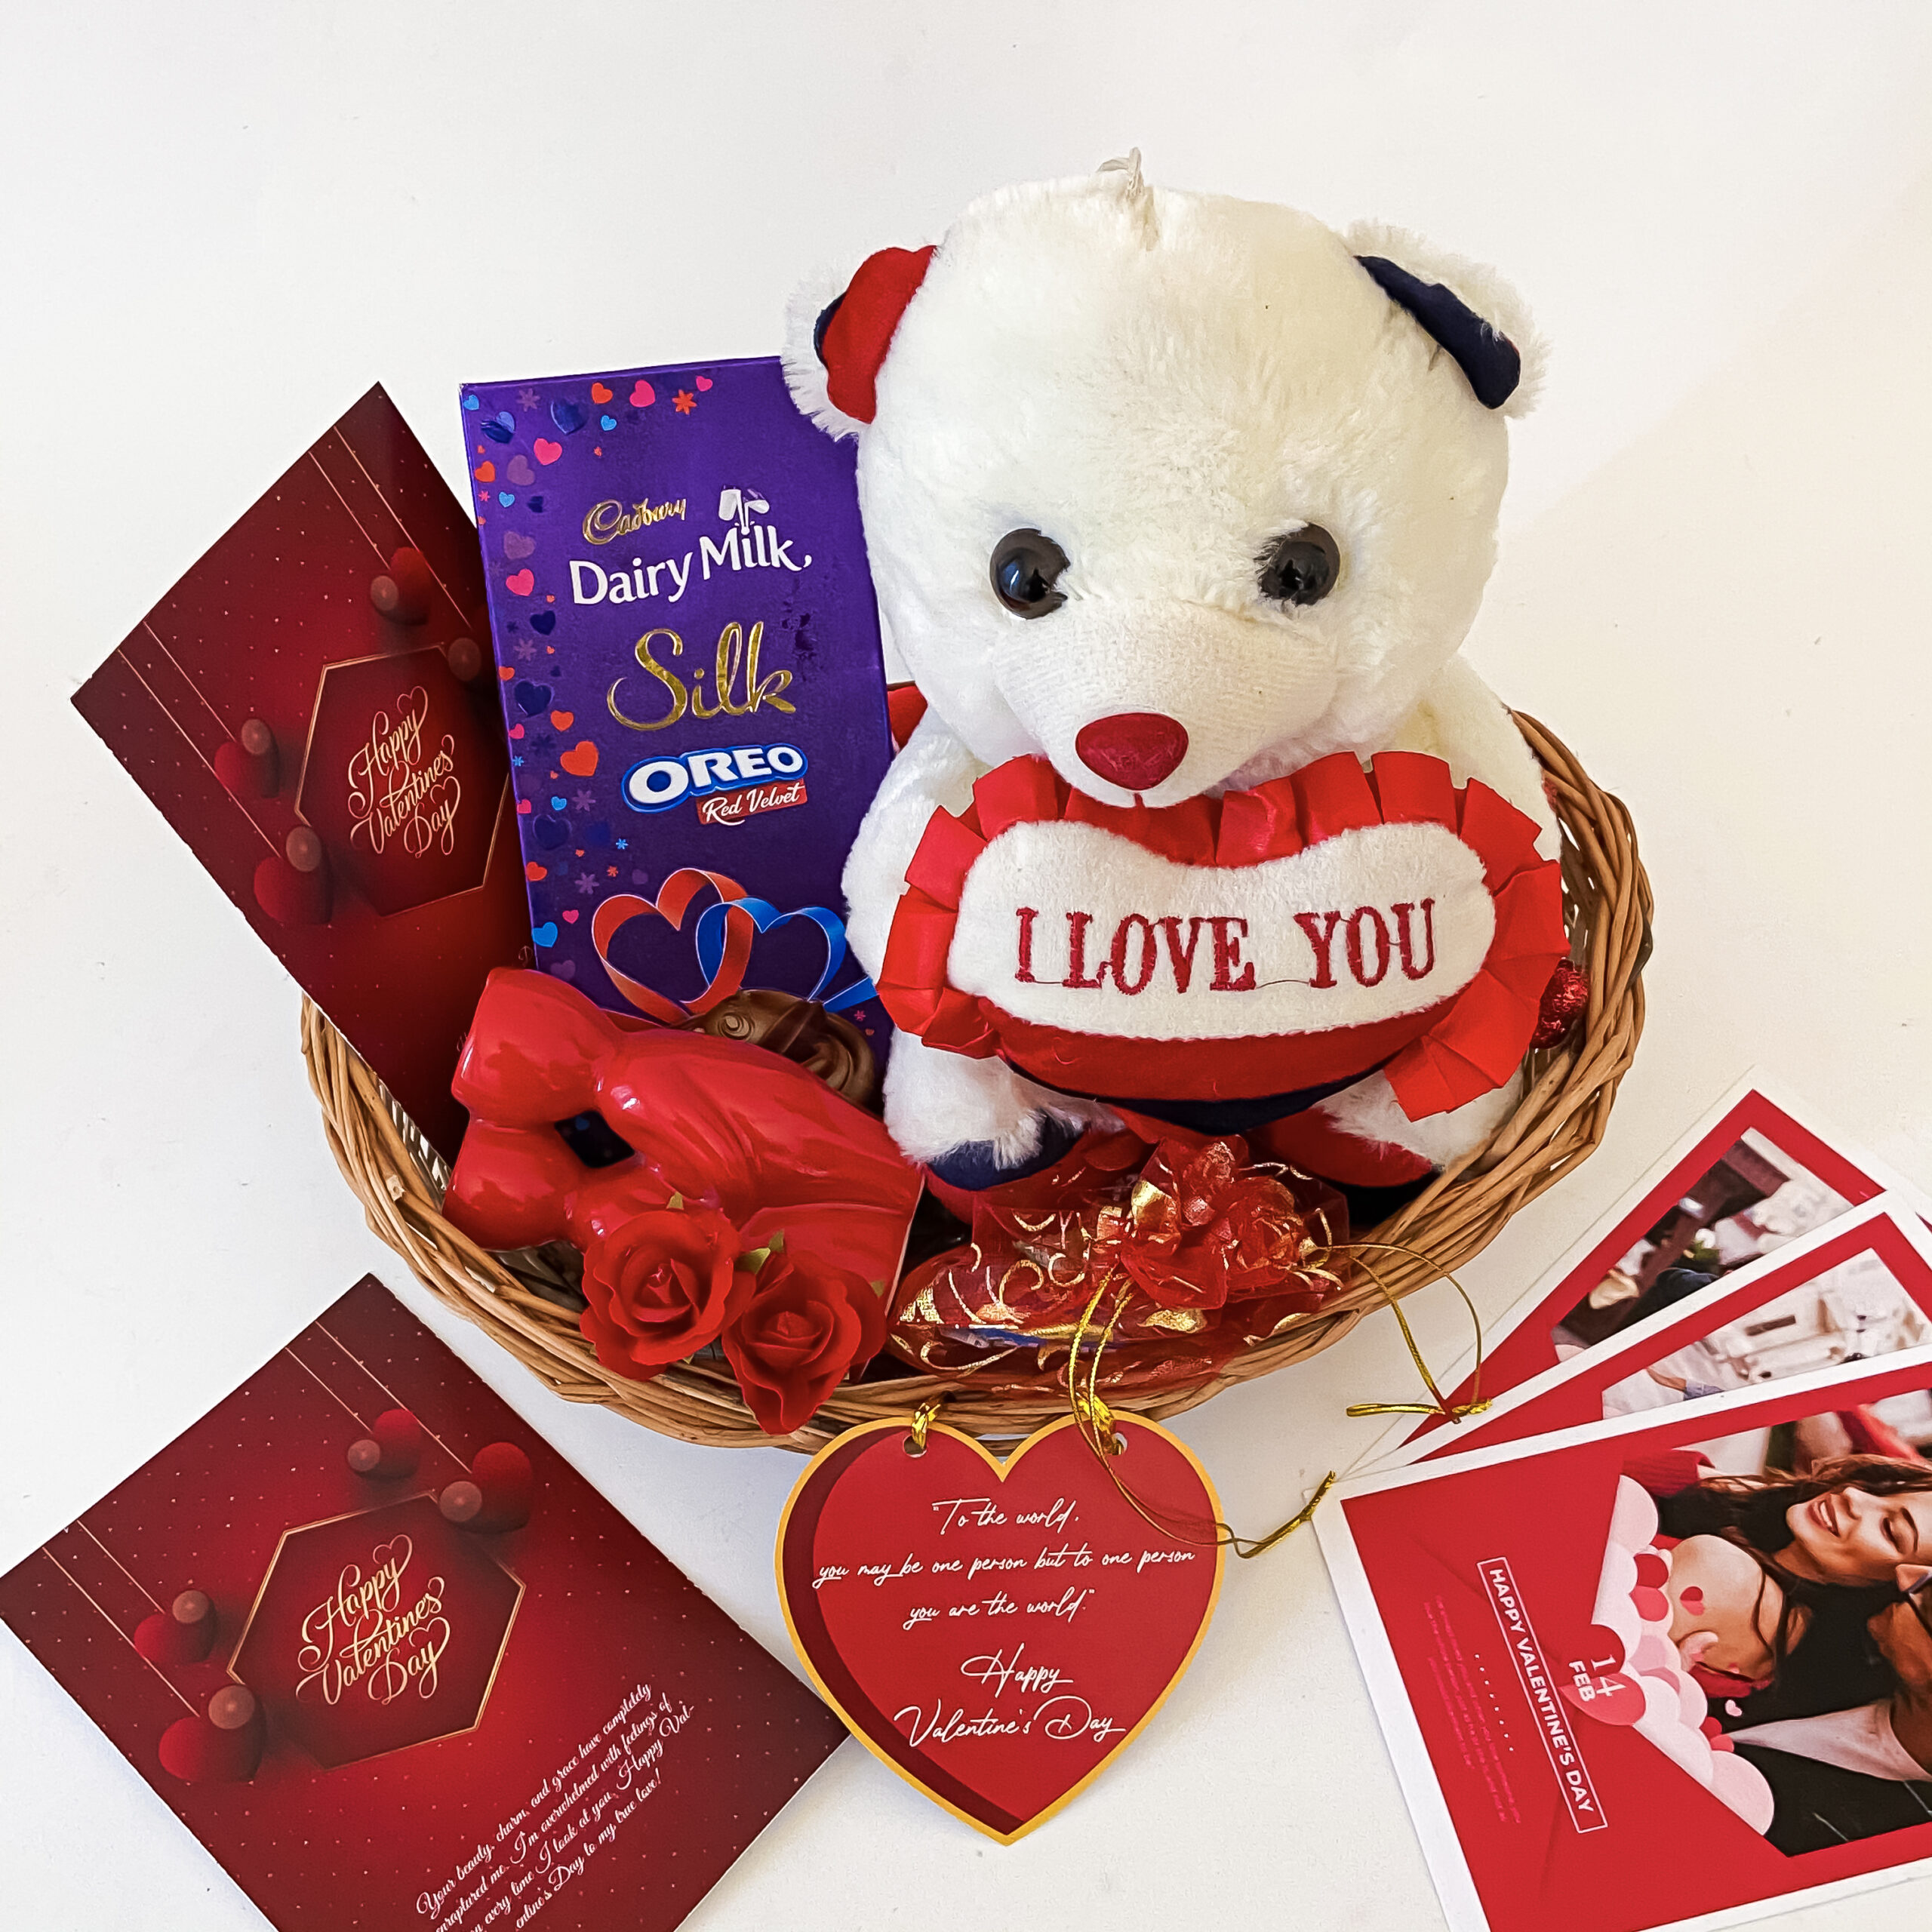 Here's What You Can Give to Loved Ones as Valentine's Day Gifts